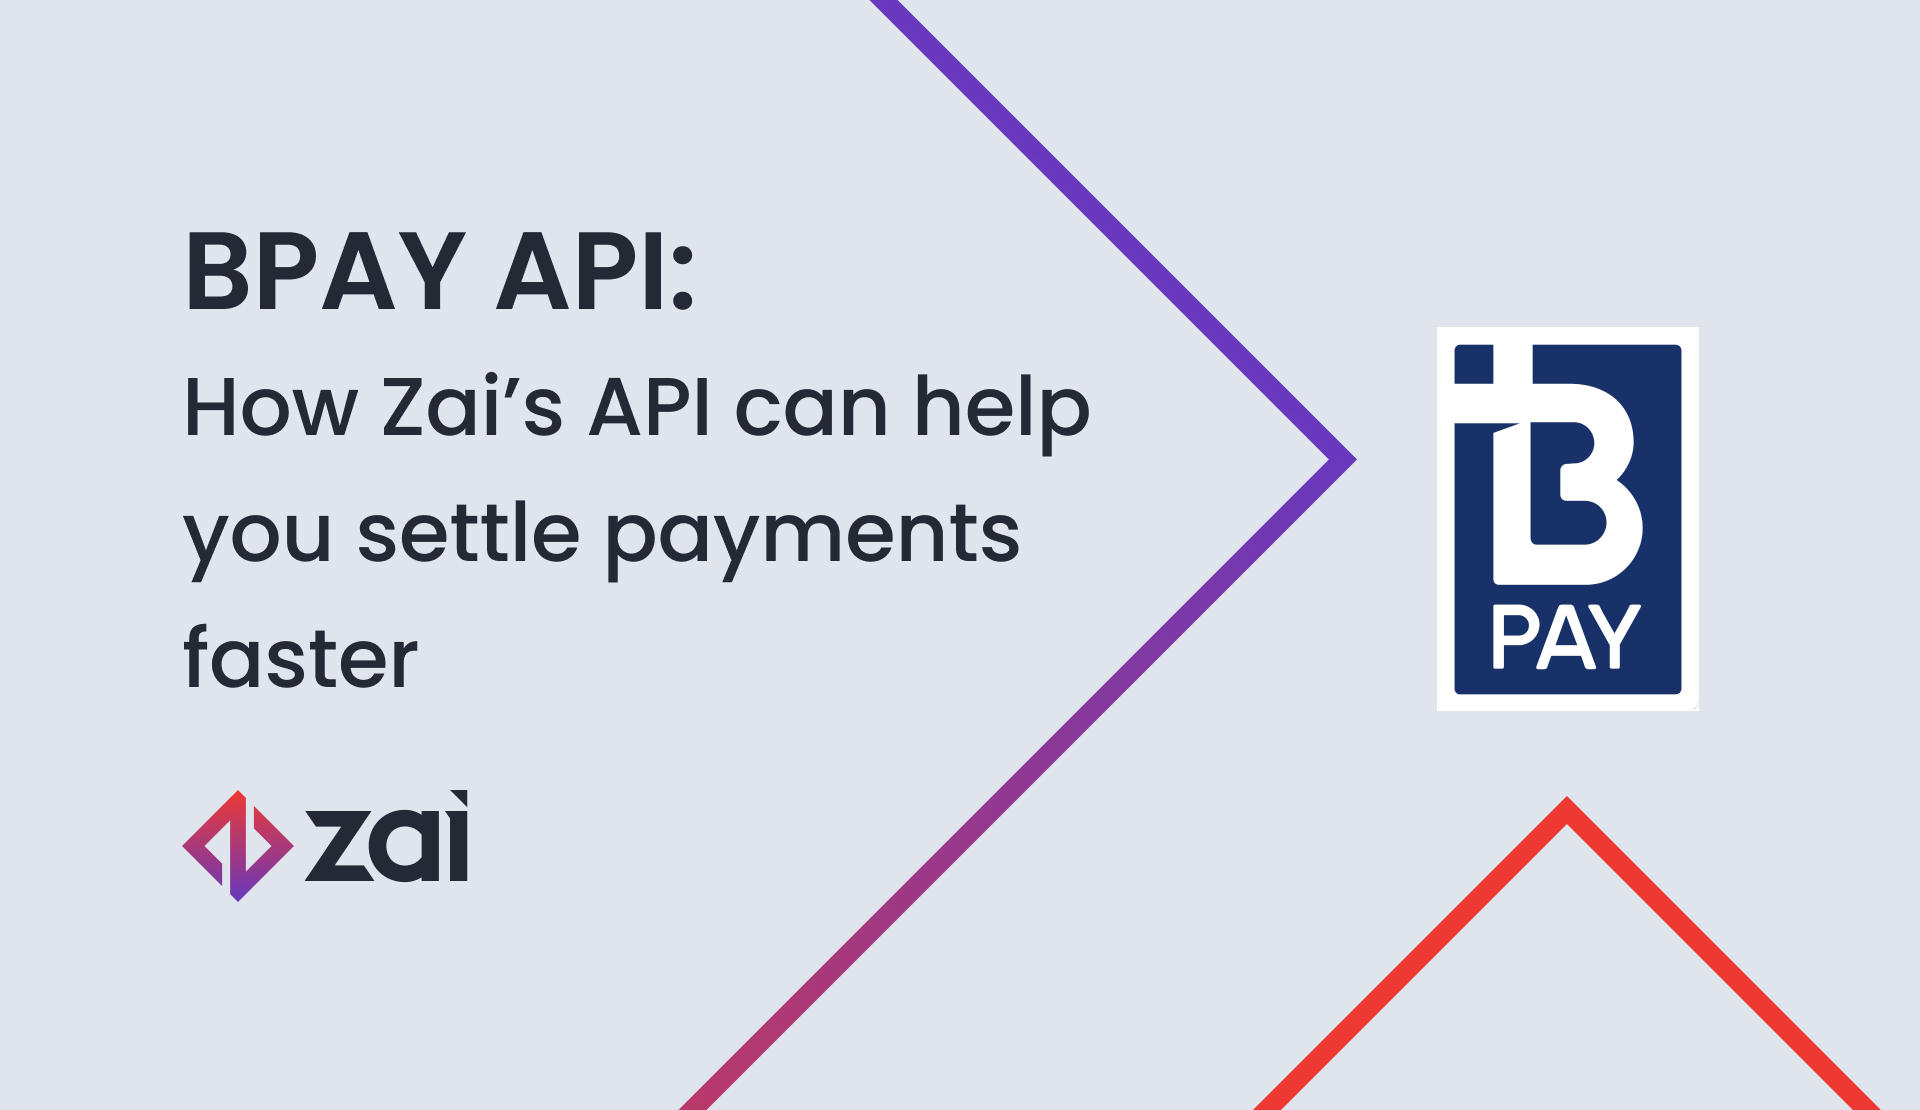 BPAY API: How Zai’s API can help you settle payments faster